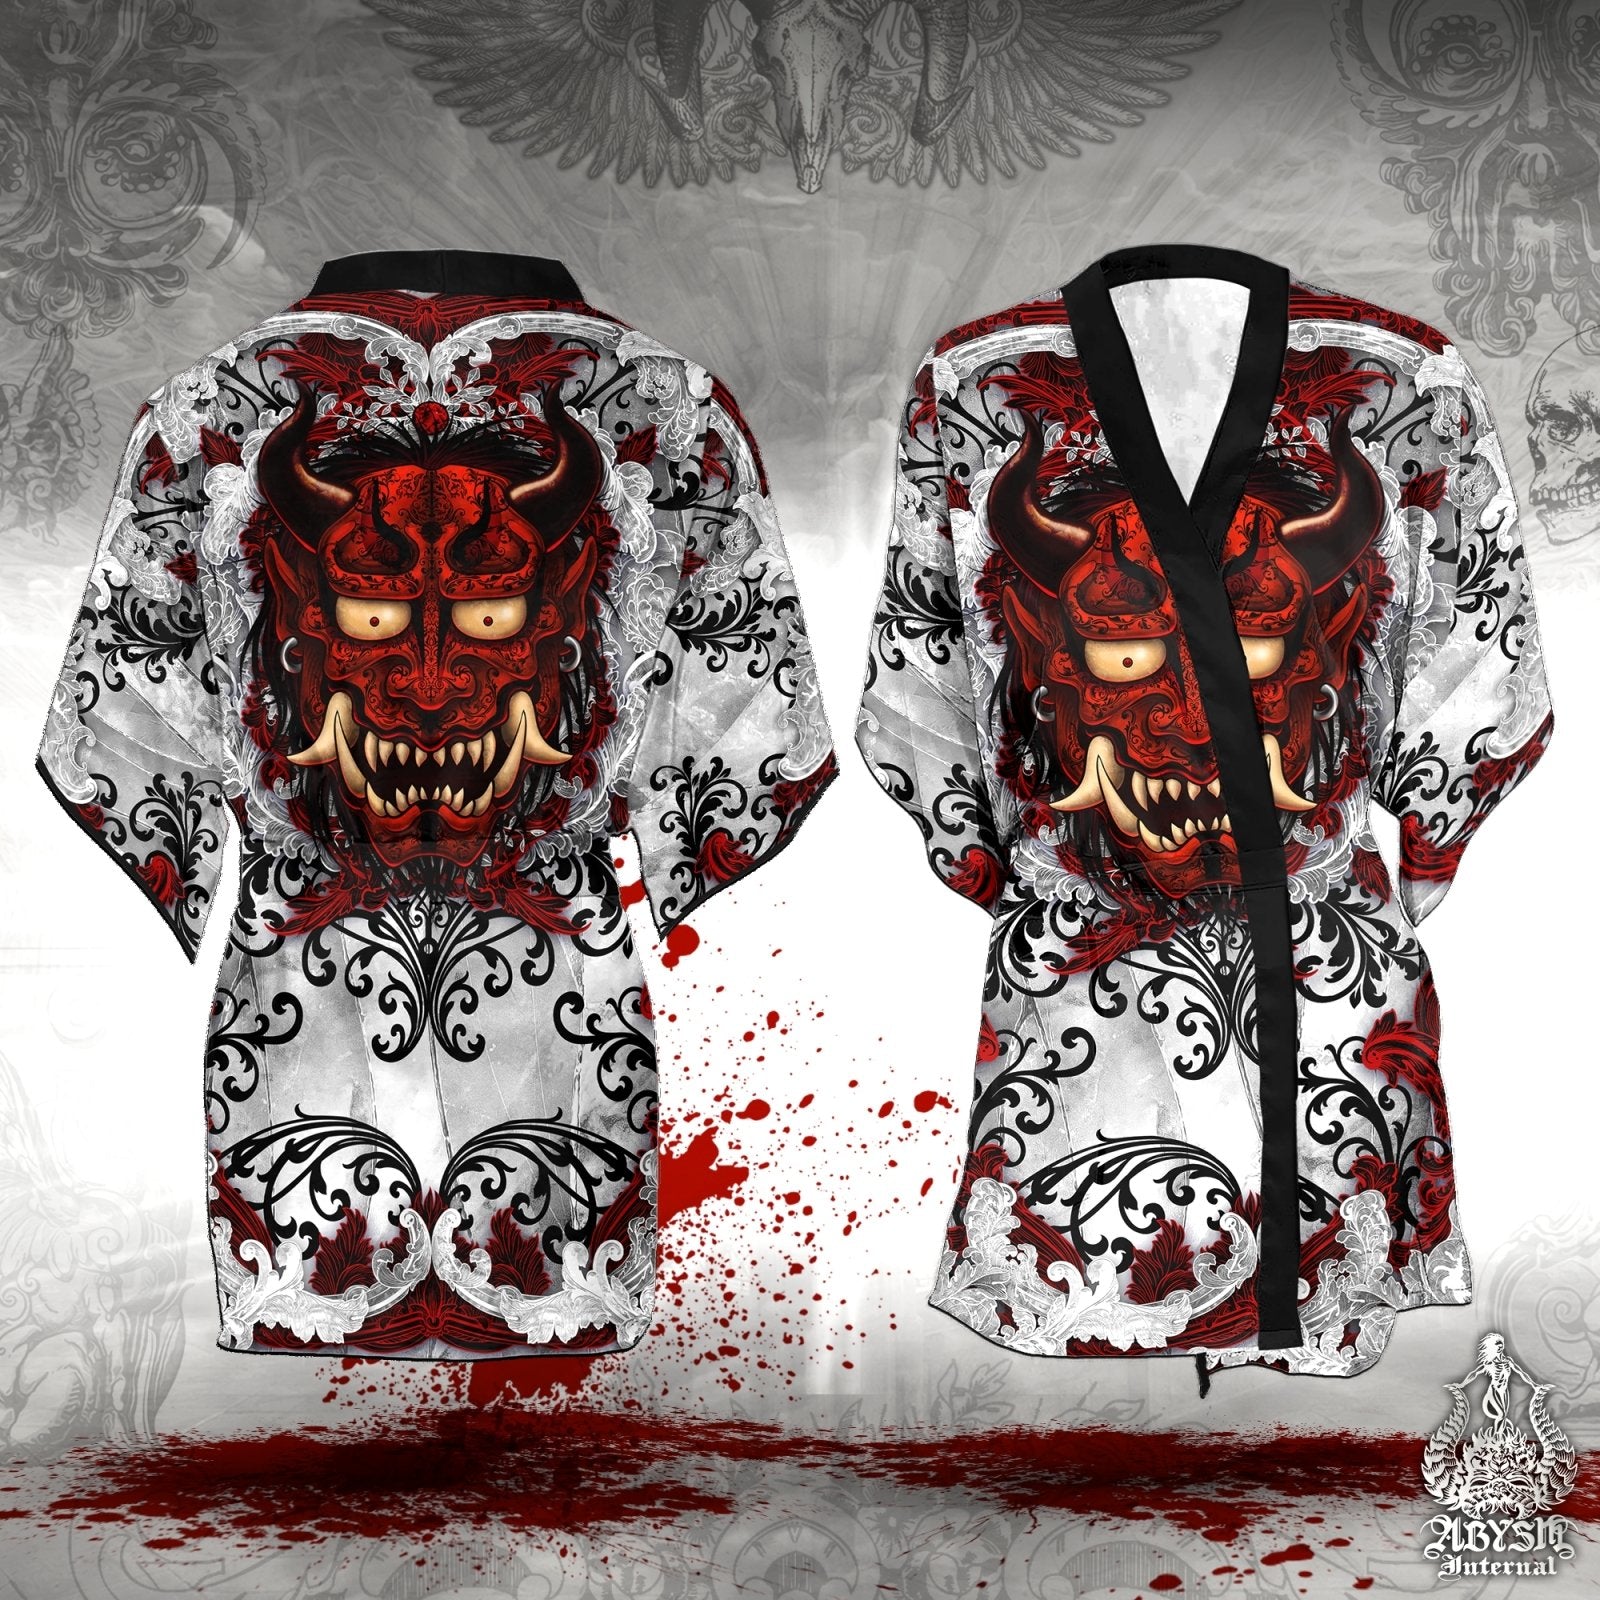 Demon Cover Up, Beach Outfit, Oni Party Kimono, Japanese Summer Festival Robe, Indie and Alternative Clothing, Unisex - Bloody White Goth - Abysm Internal